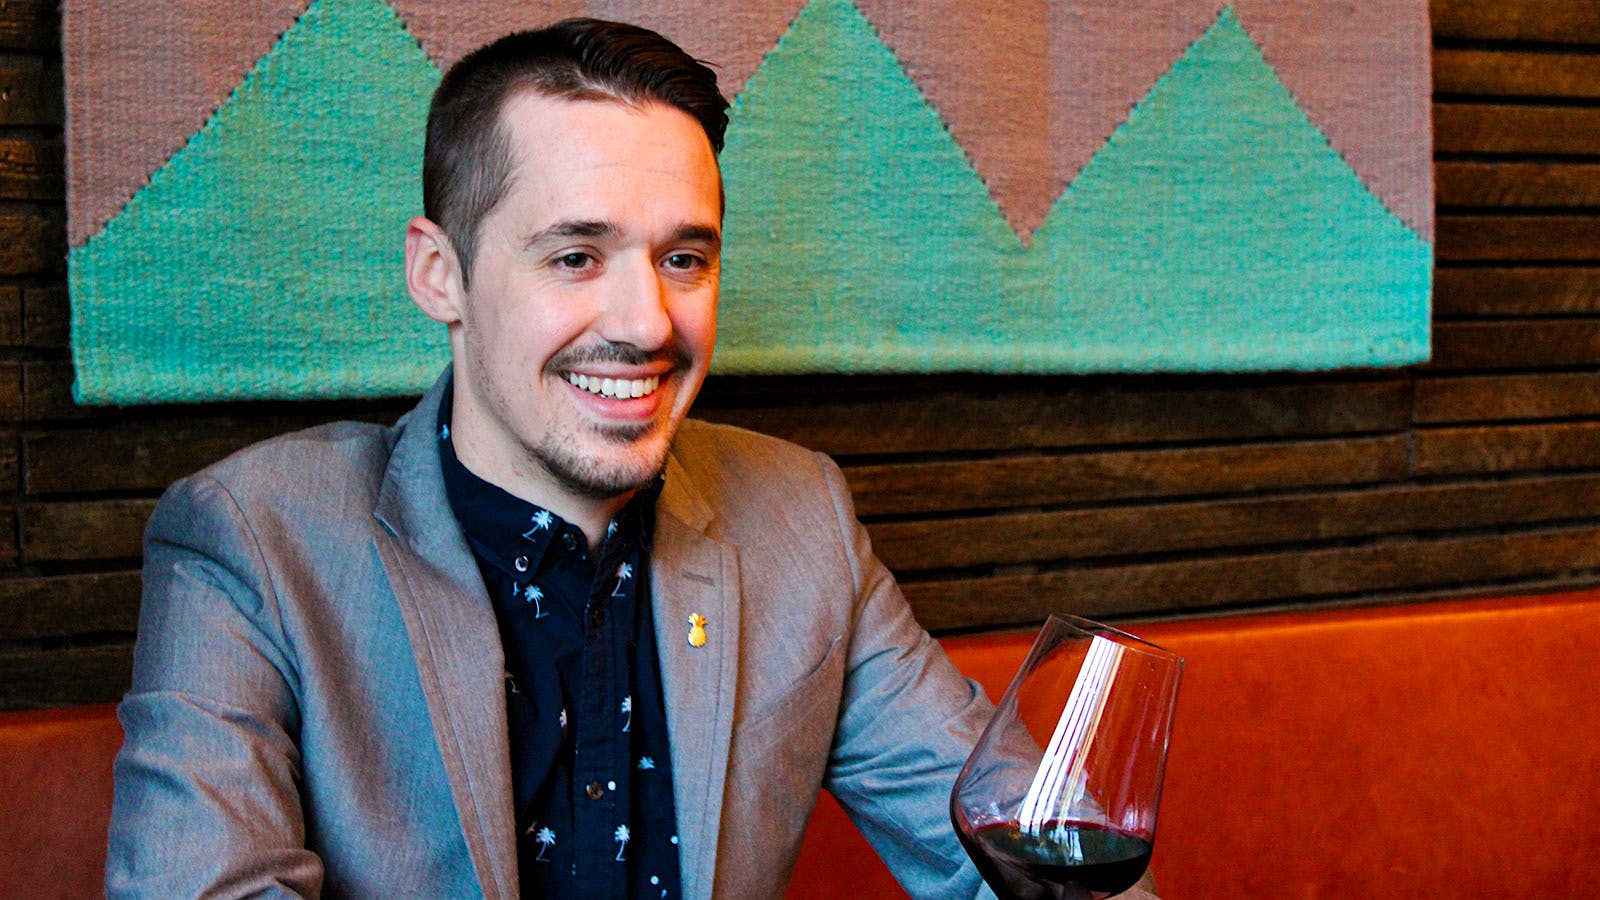 Alex Cuper Homes in on South American Wines in the Windy City